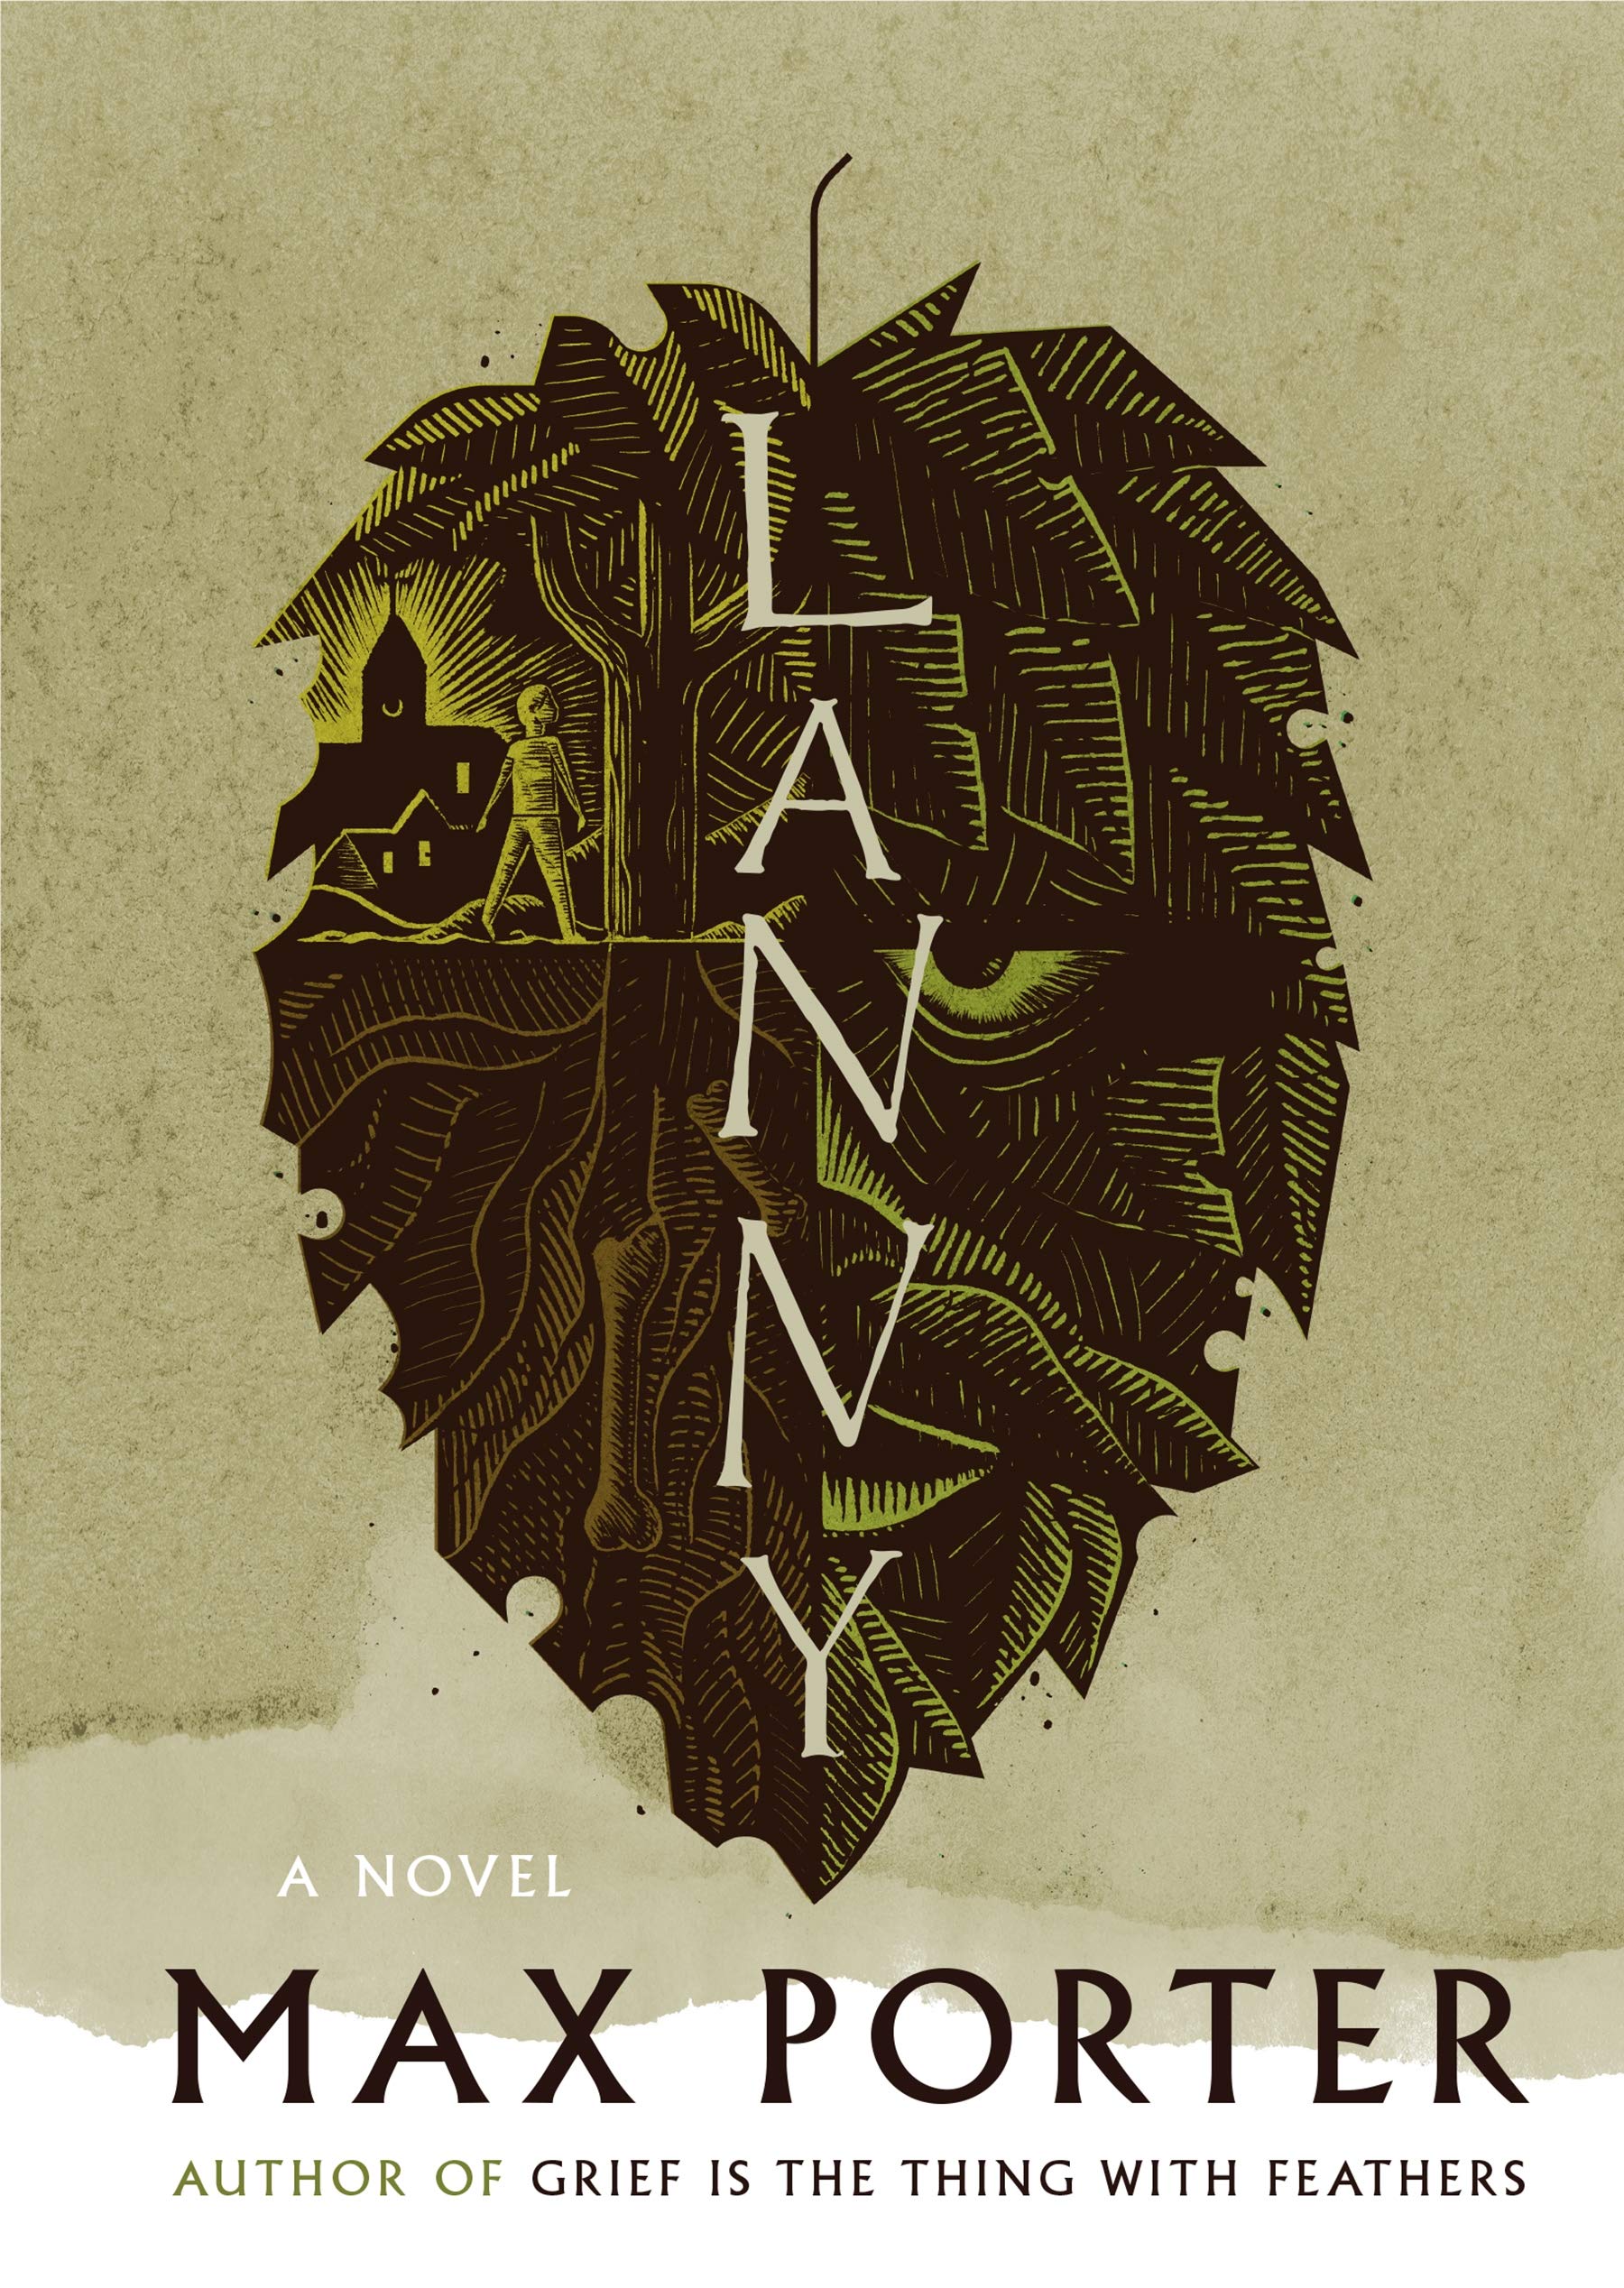 Lanny Cover